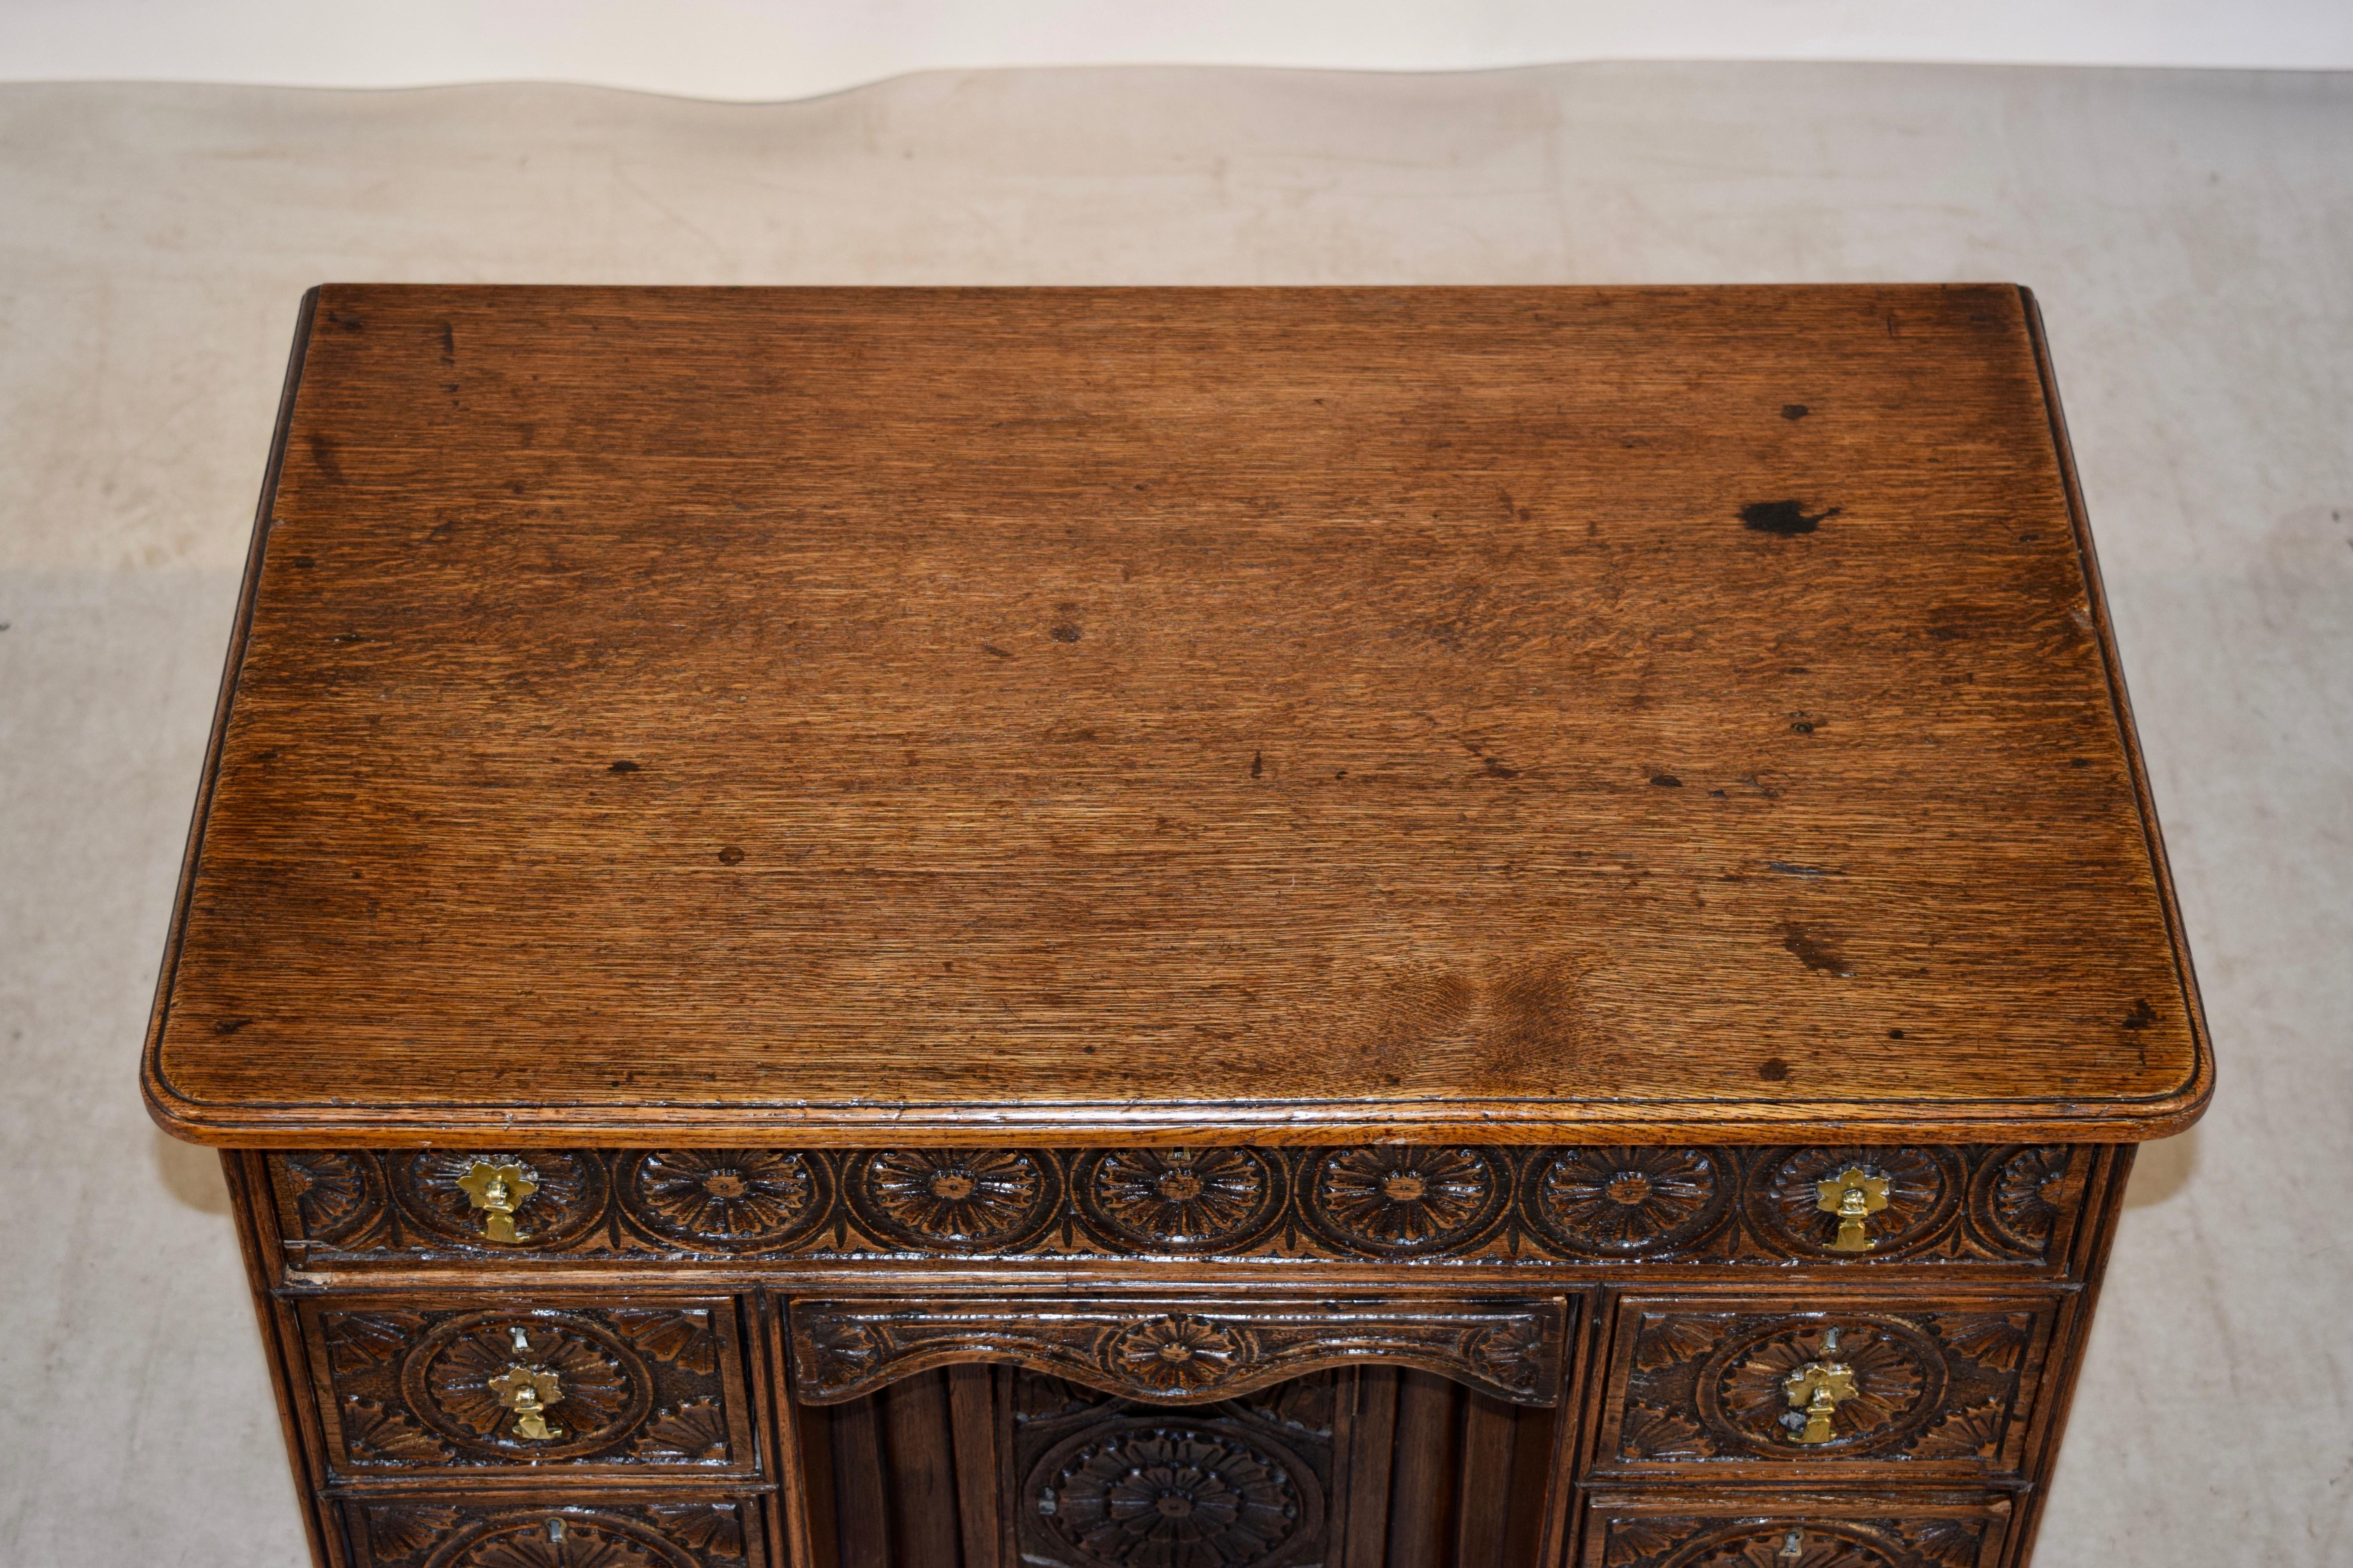 19th Century English Knee Hole Desk In Good Condition For Sale In High Point, NC